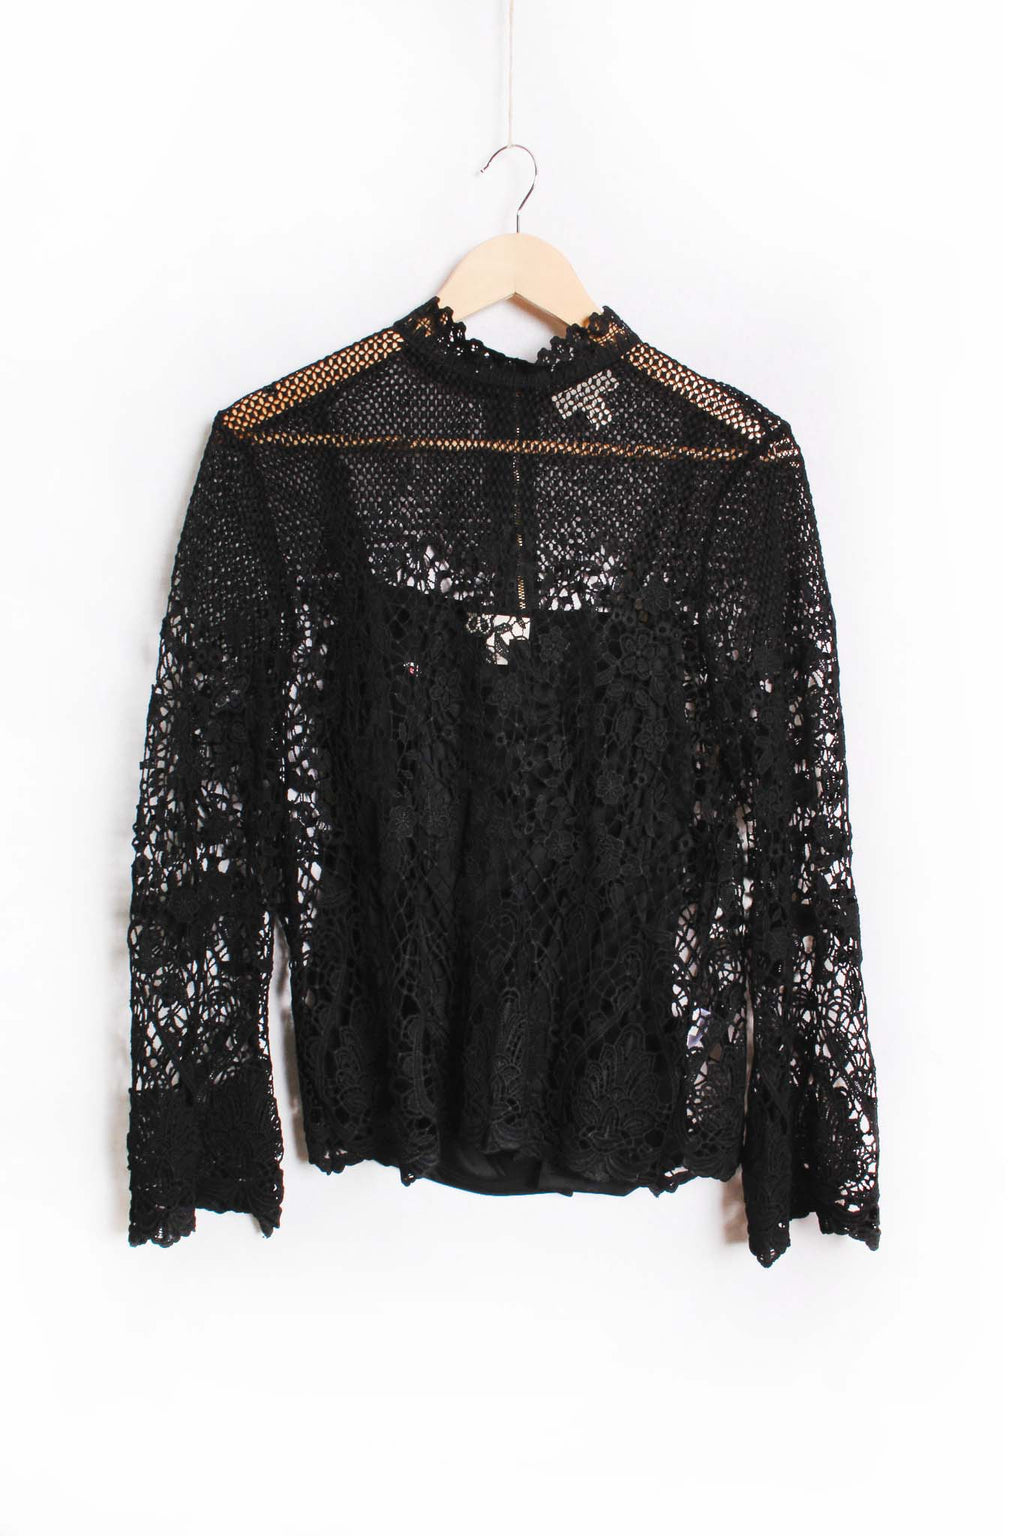 Women's Long Sleeve Zip Up Lace Embroidered Top